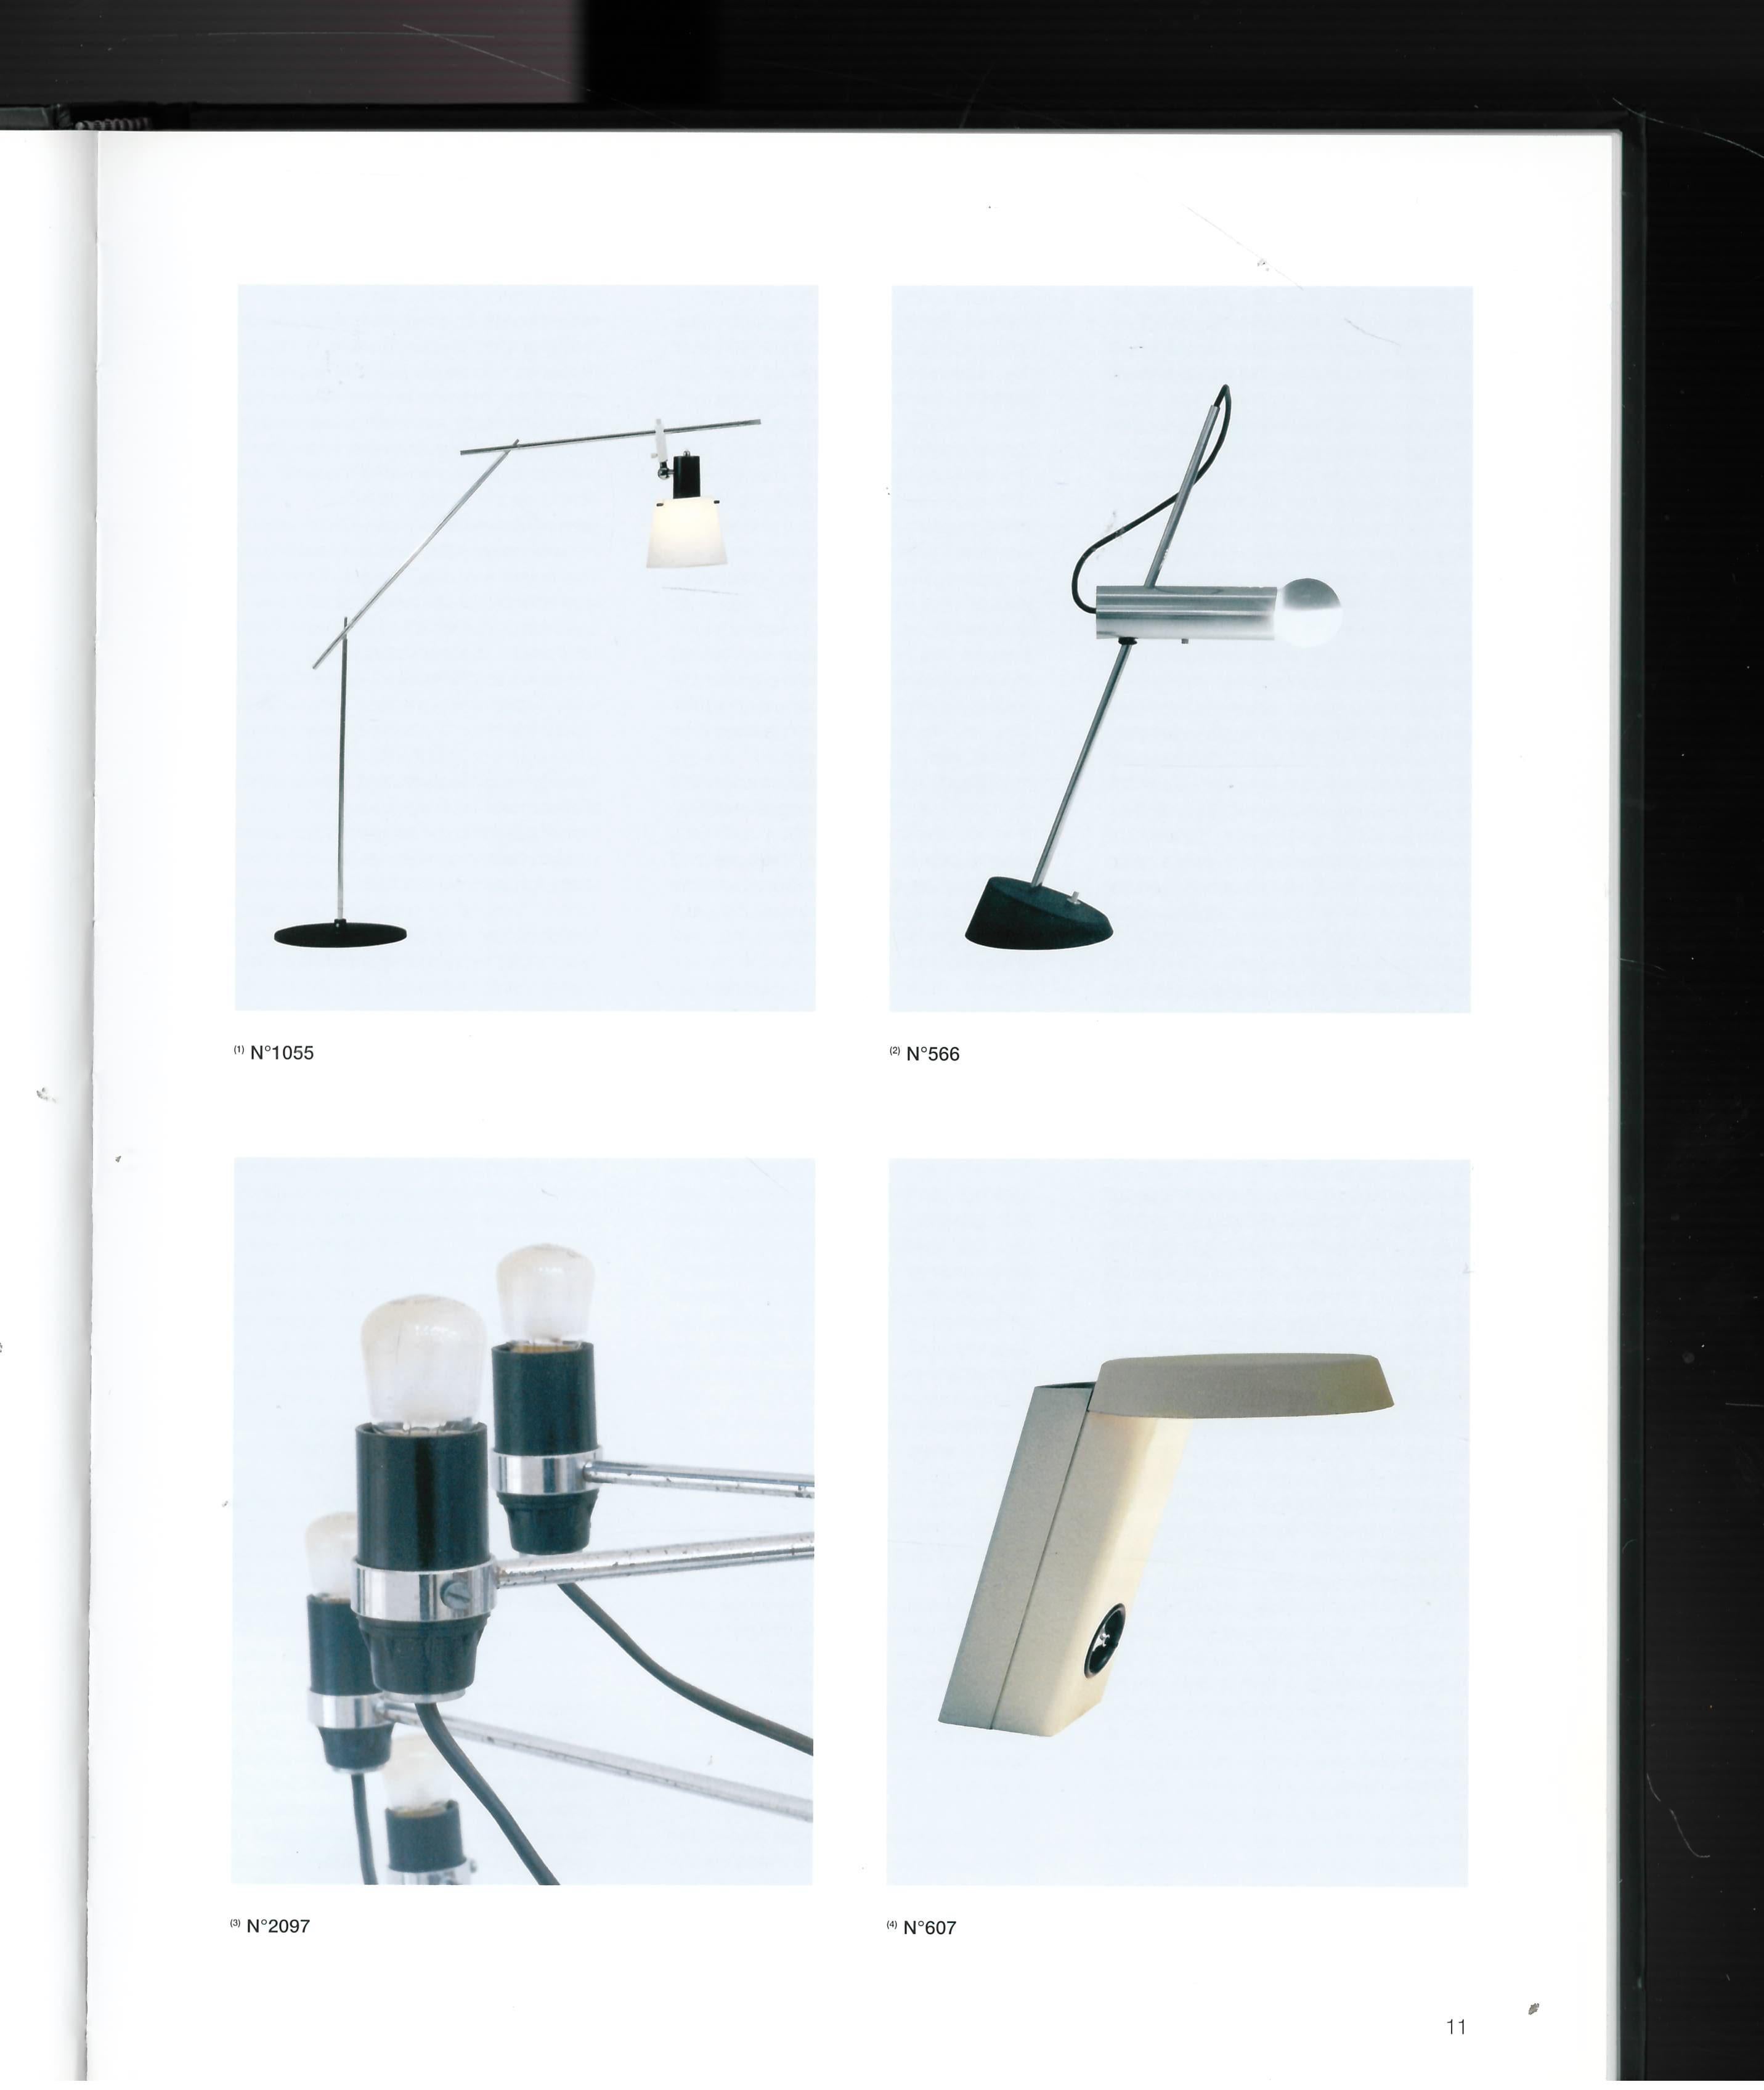 Published in 2008, this is an exhibition catalogue from the Galerie Christine Diegoni which illustrates many of his most famous lighting designs. Sarfatti was the founder of the Italian lighting company 